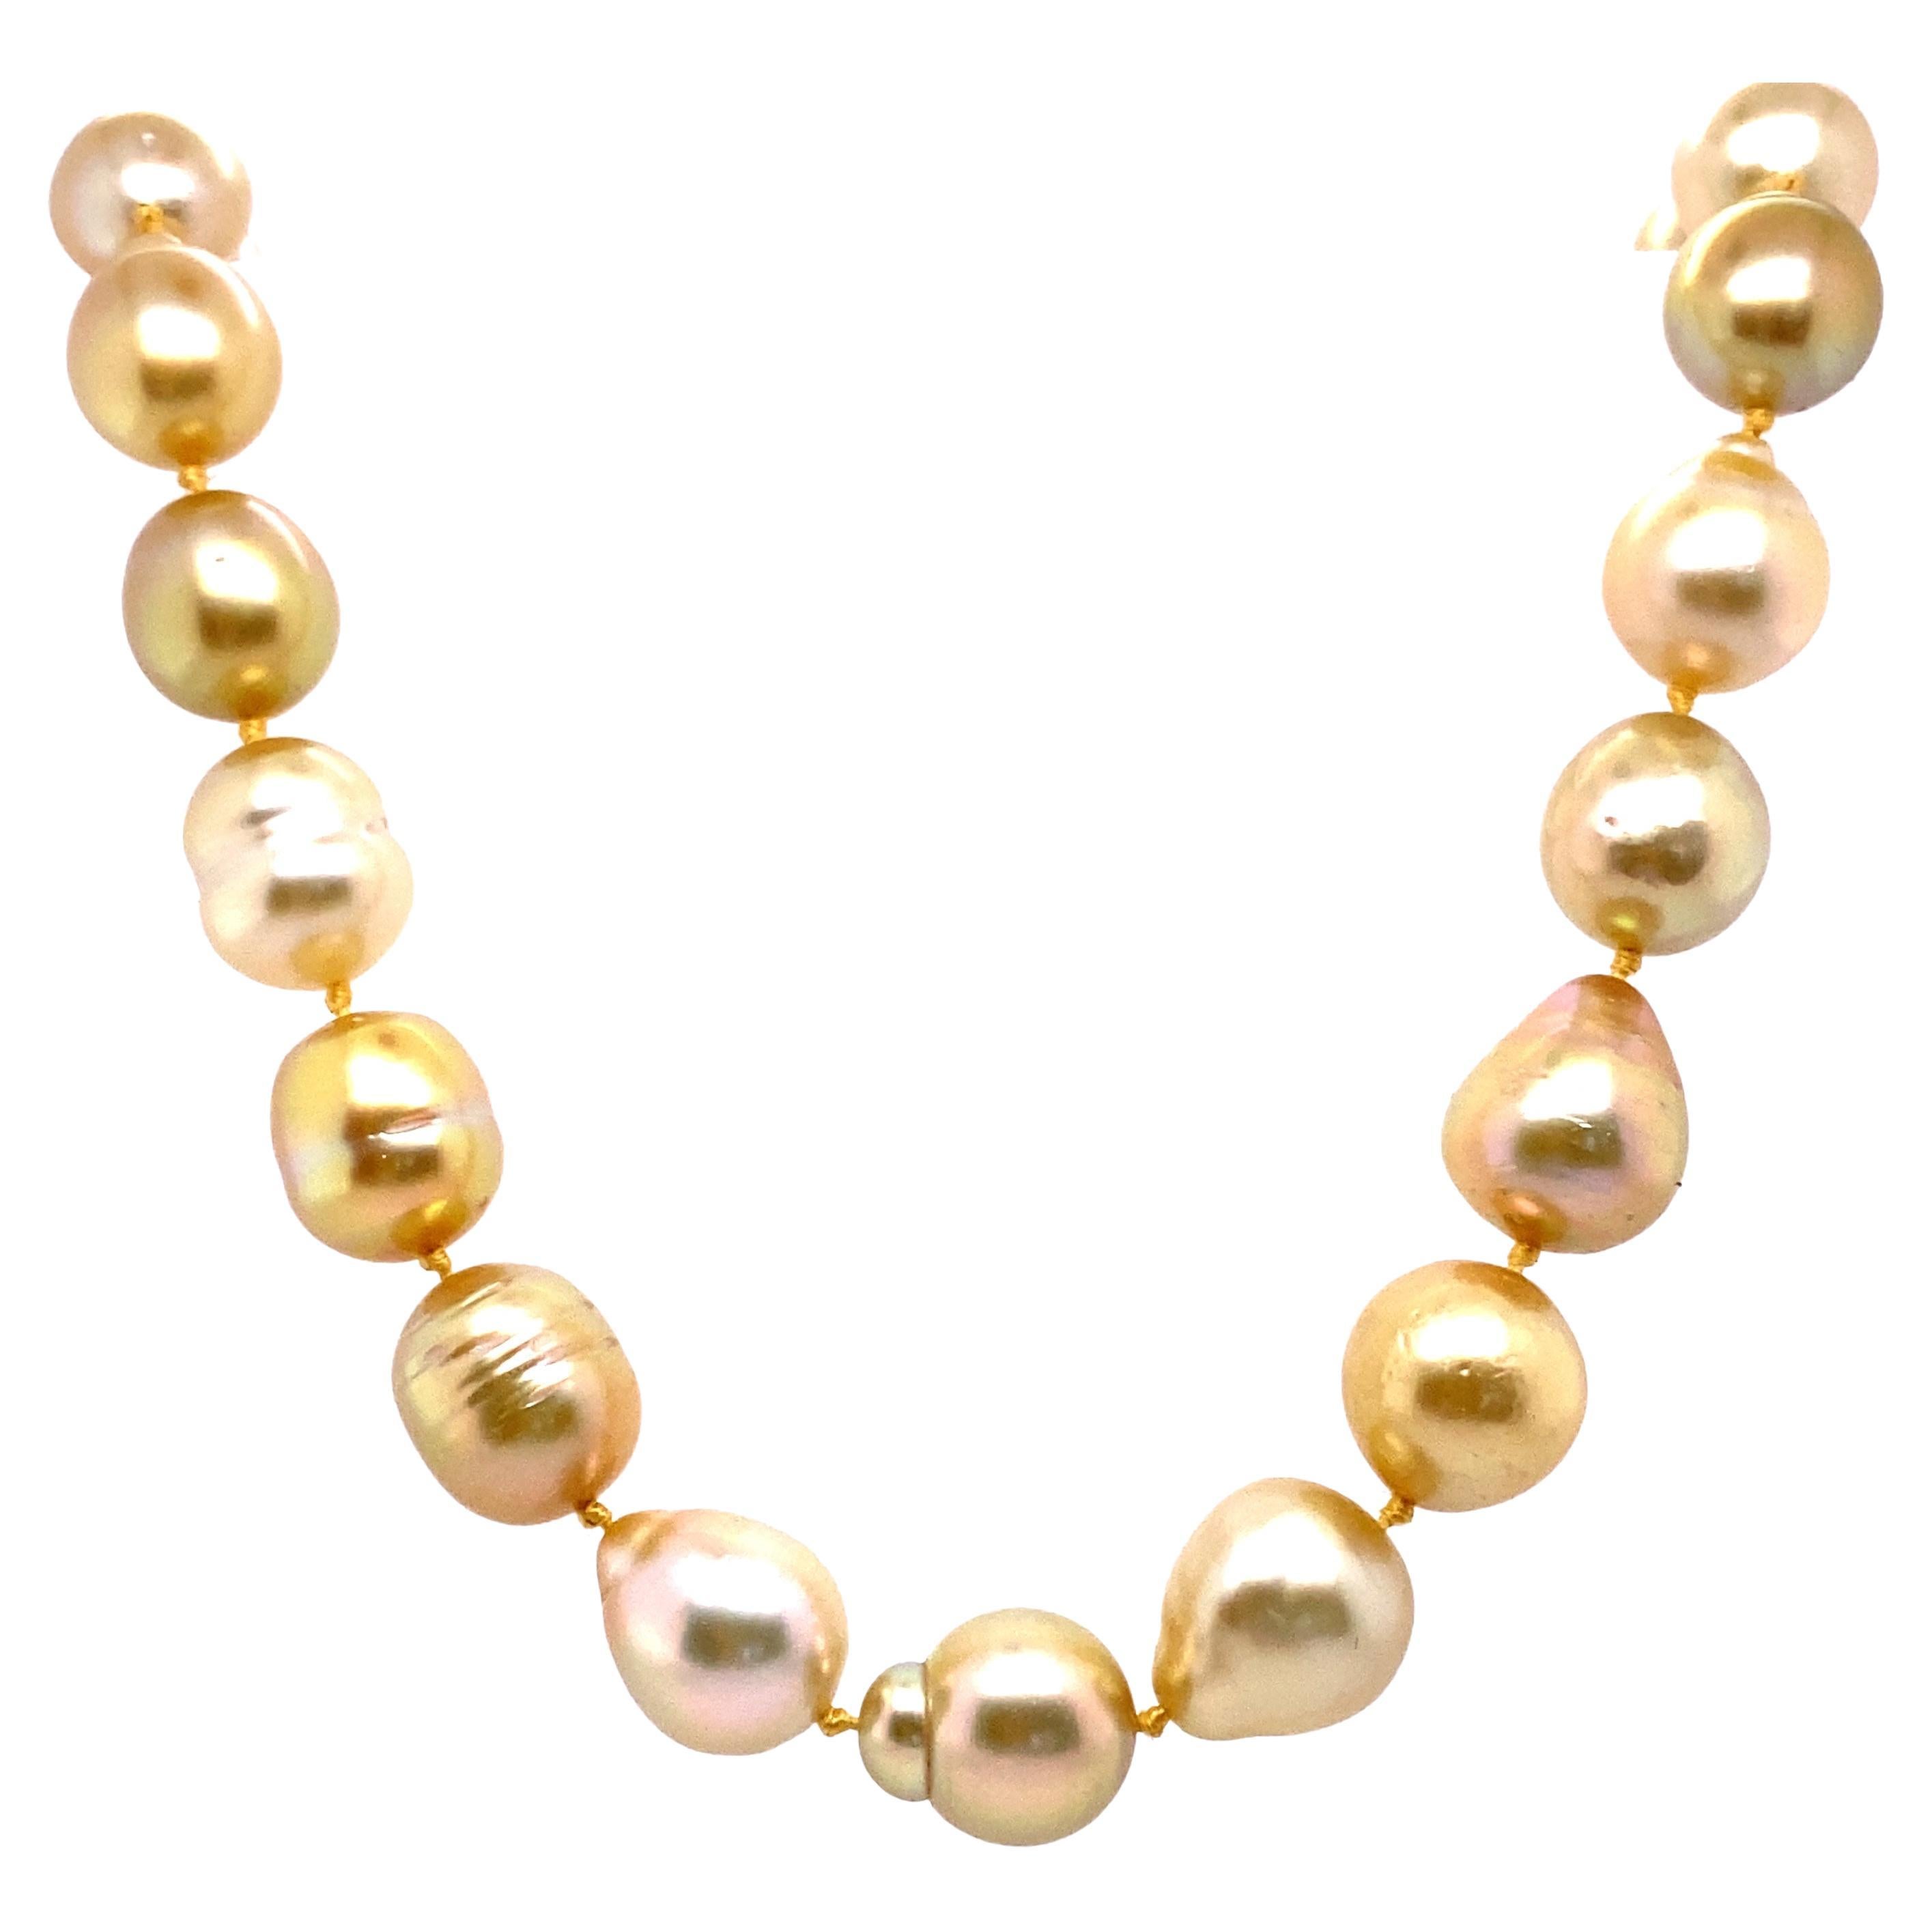 Natural, Golden Yellow Baroque Pearls Strand Necklace, 14K Gold Clasp For Sale